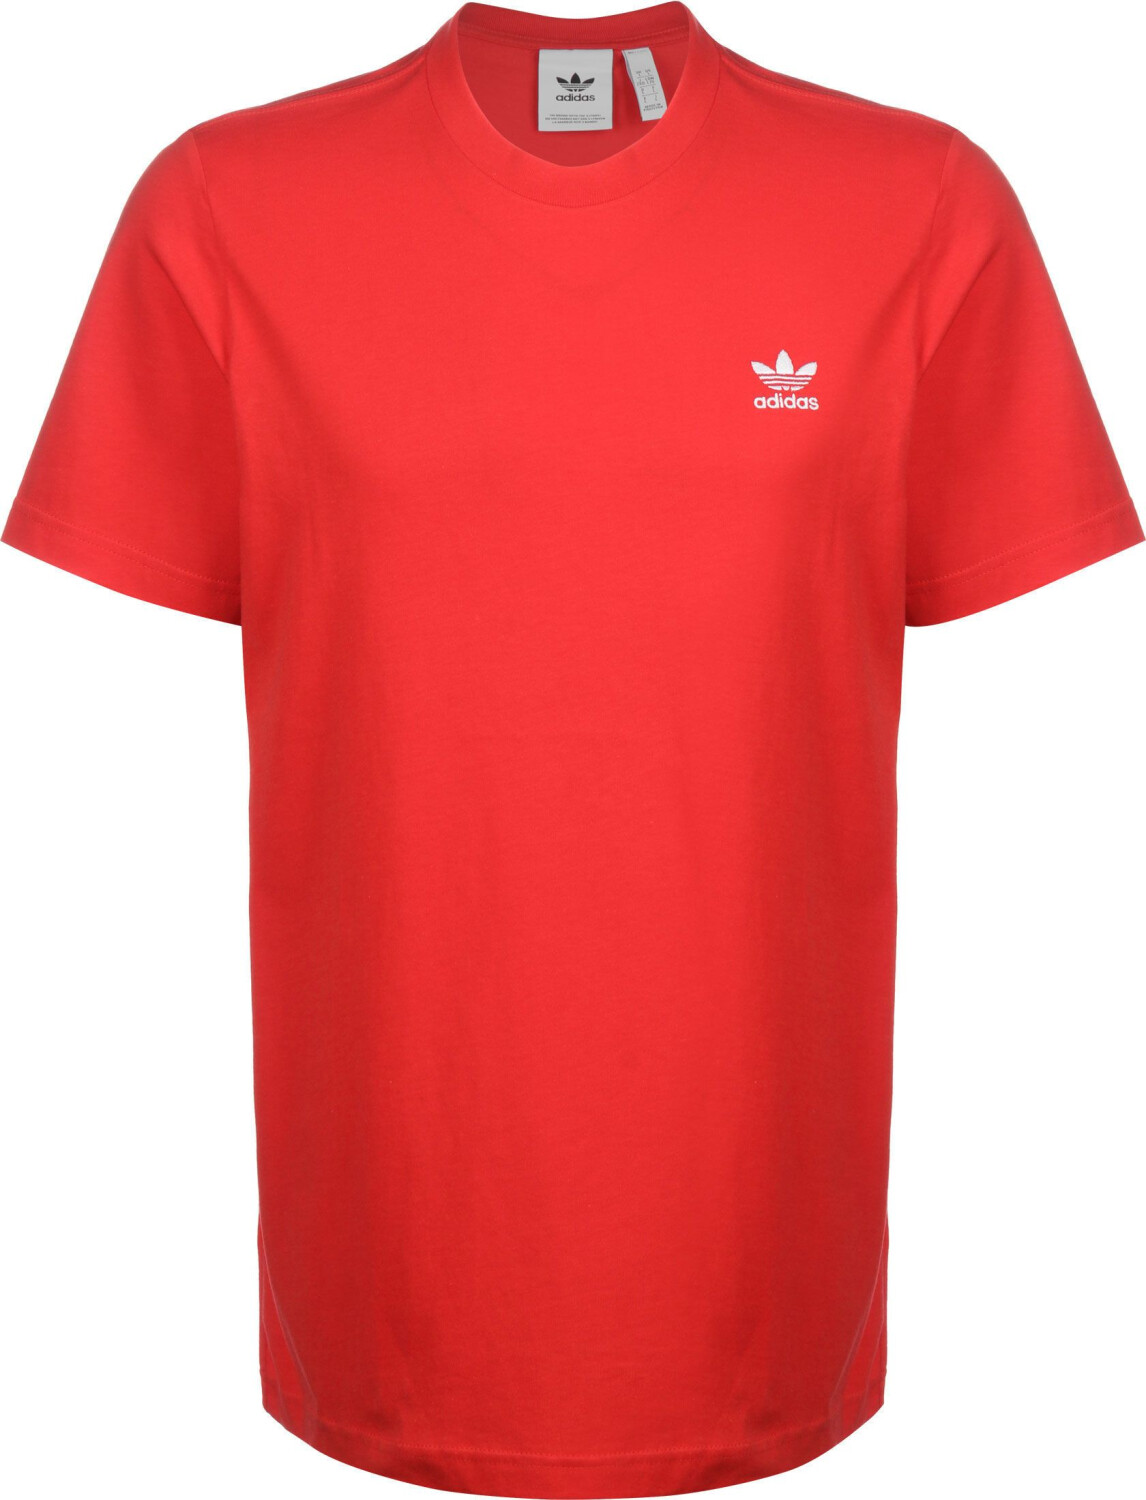 Adidas Best from Trefoil T-Shirt £9.99 Buy on (Today) – Essentials Deals